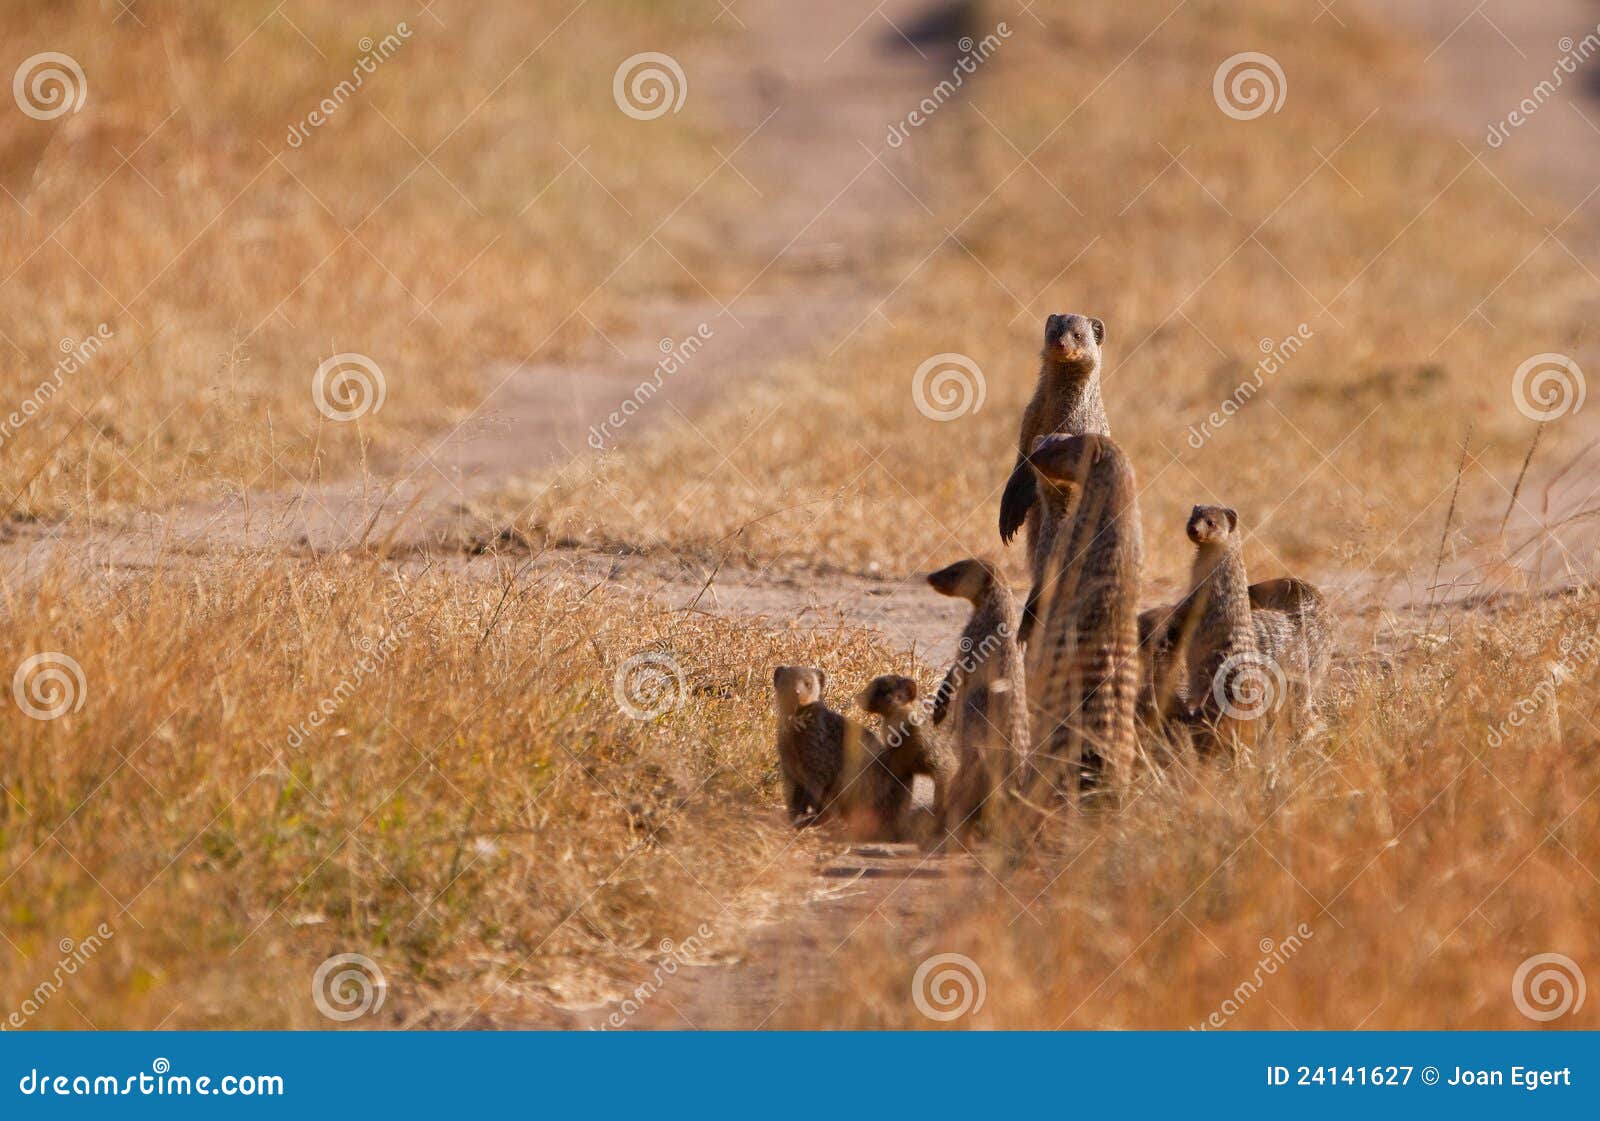 the banded mongoose family